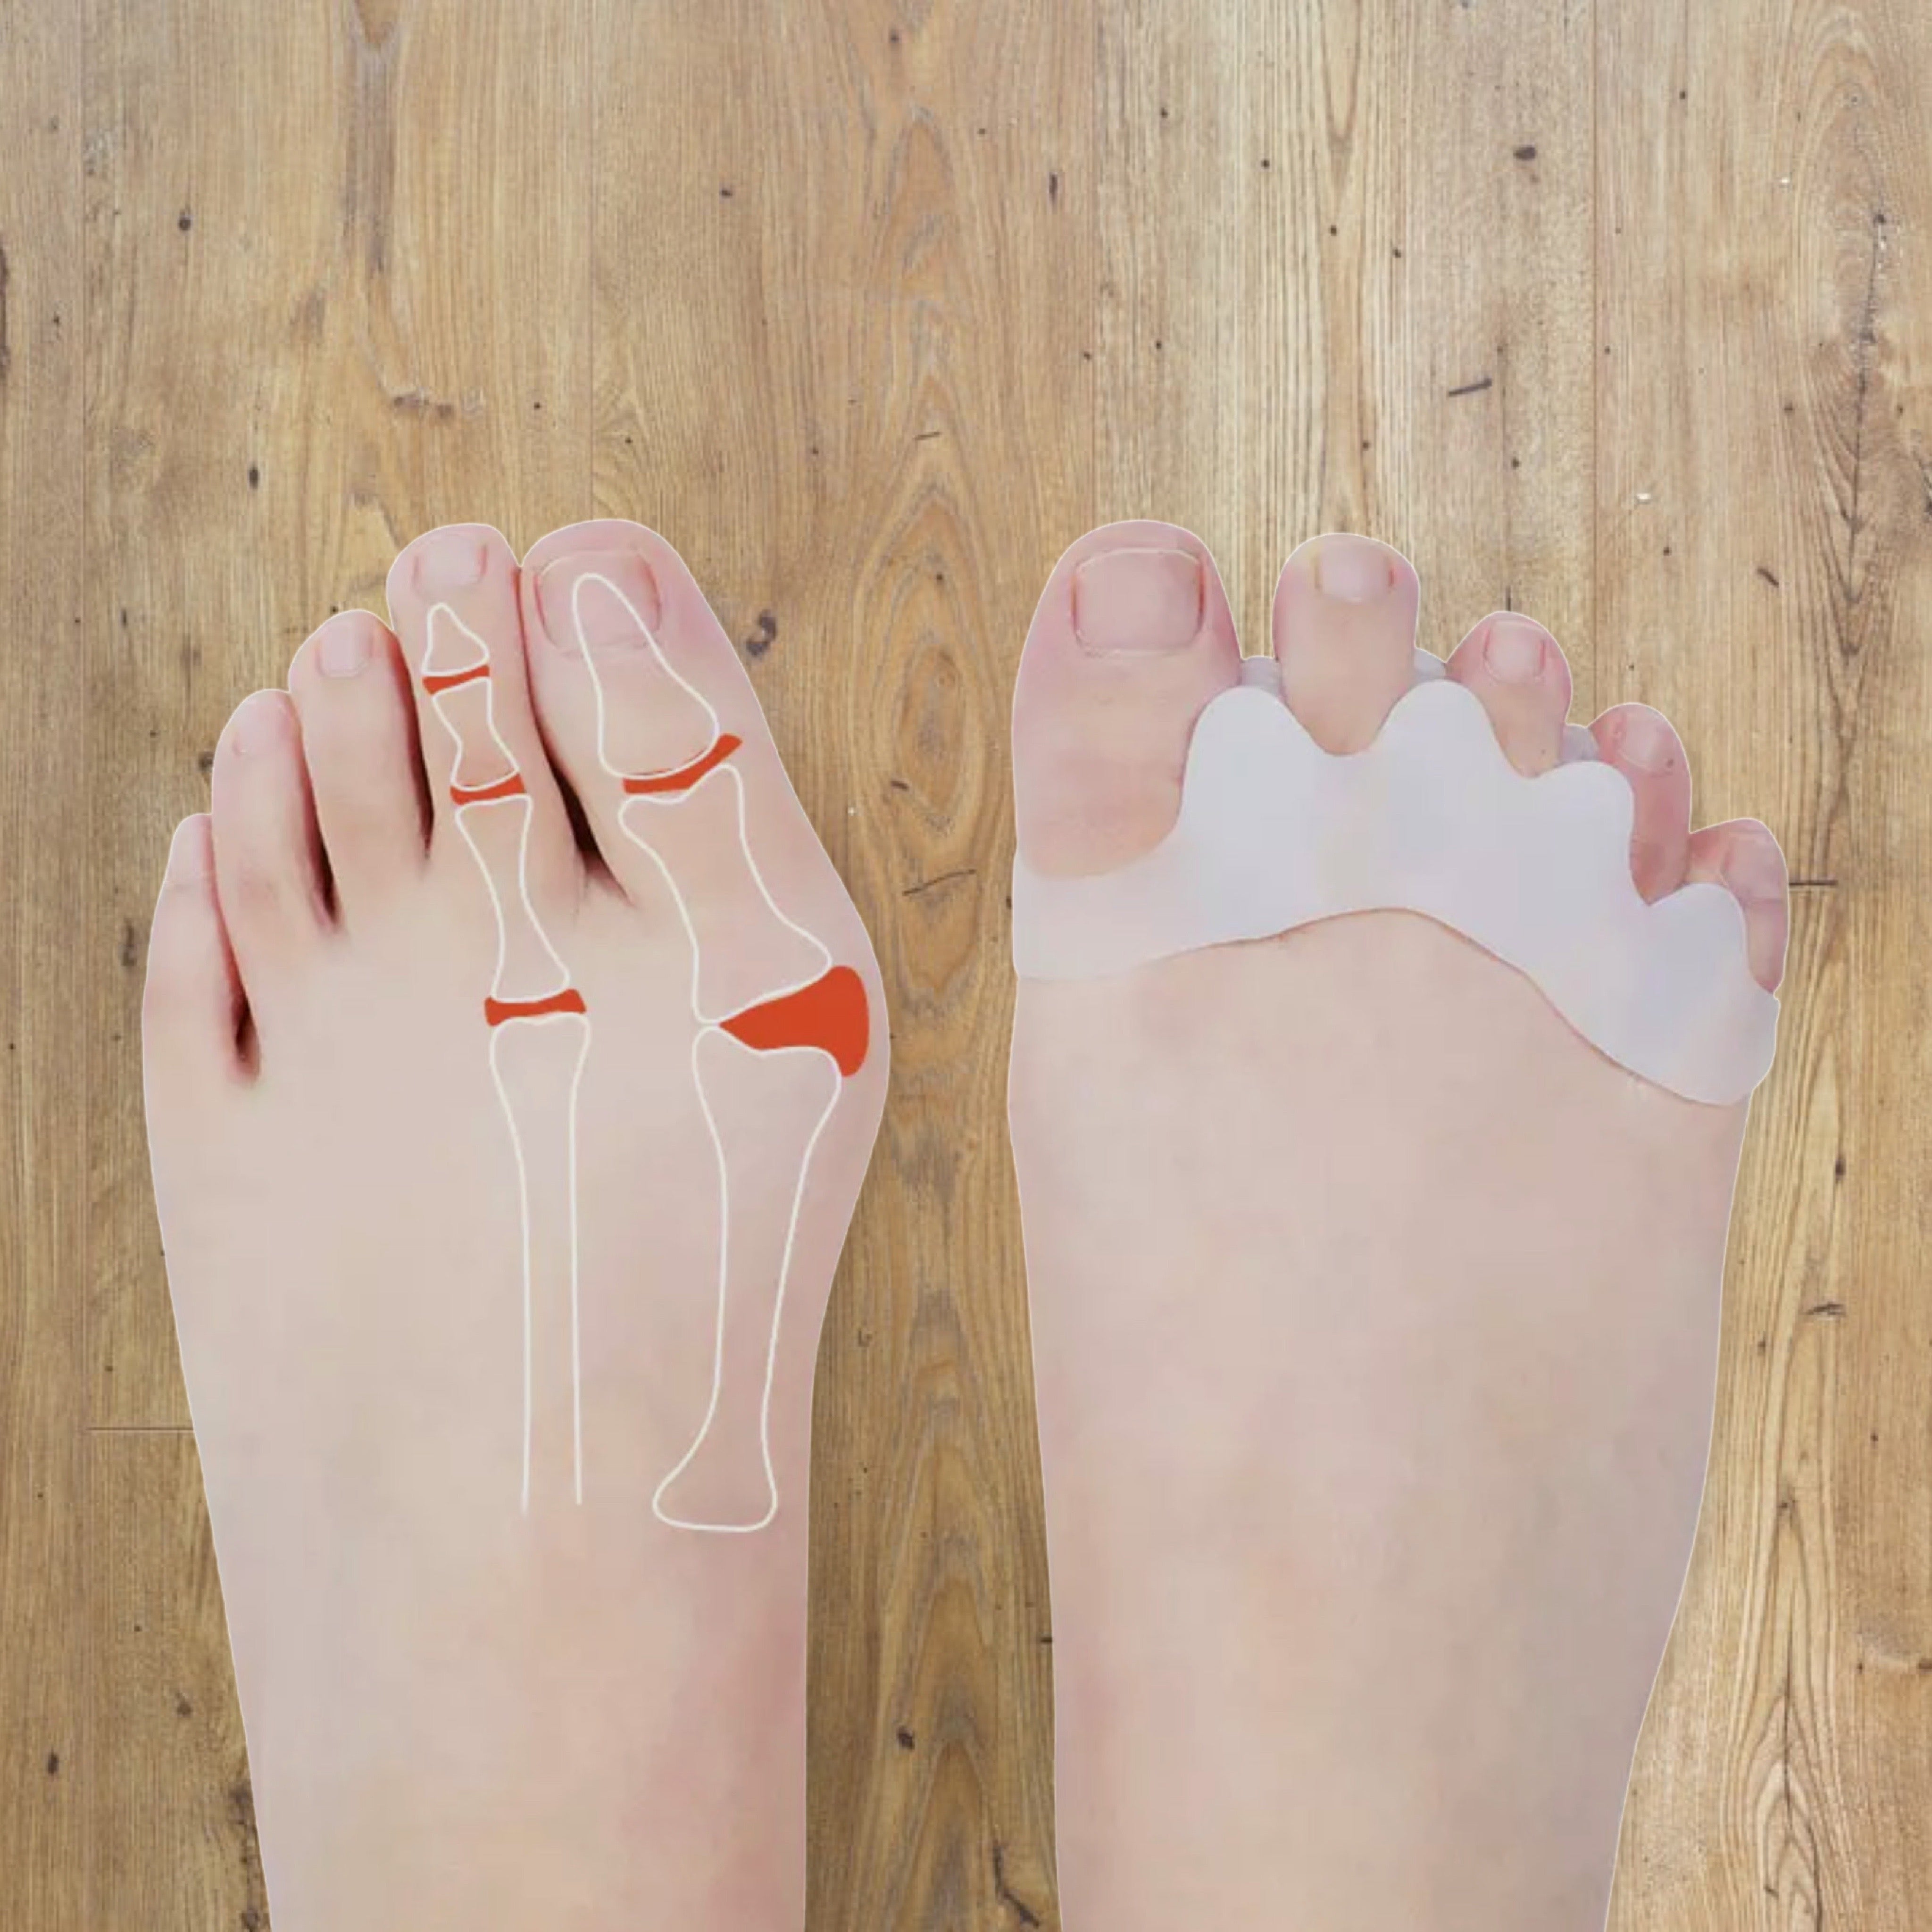 Toe Spacers: Game-changing hack or gimmick? - MOTUS Physical Therapy